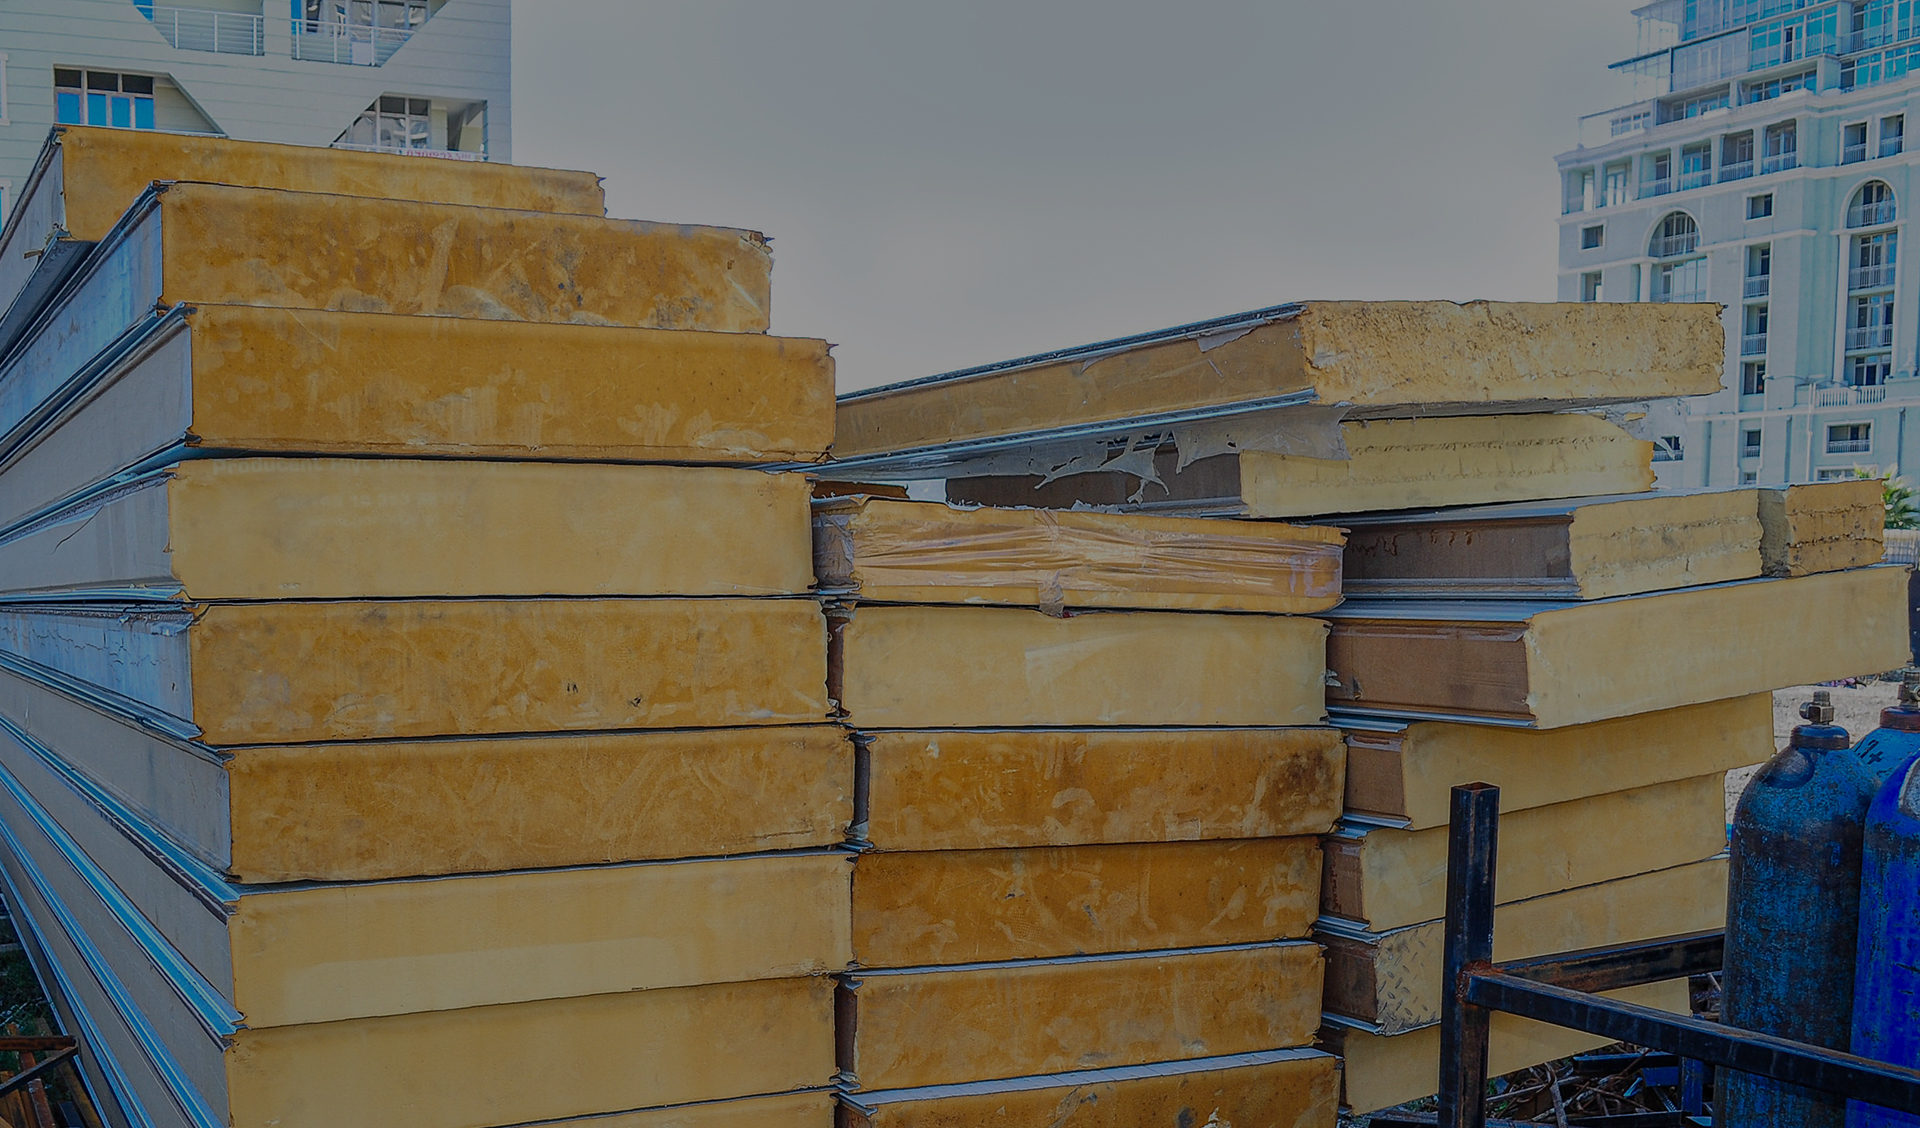 Sandwich panels pur pir: safety and insulation